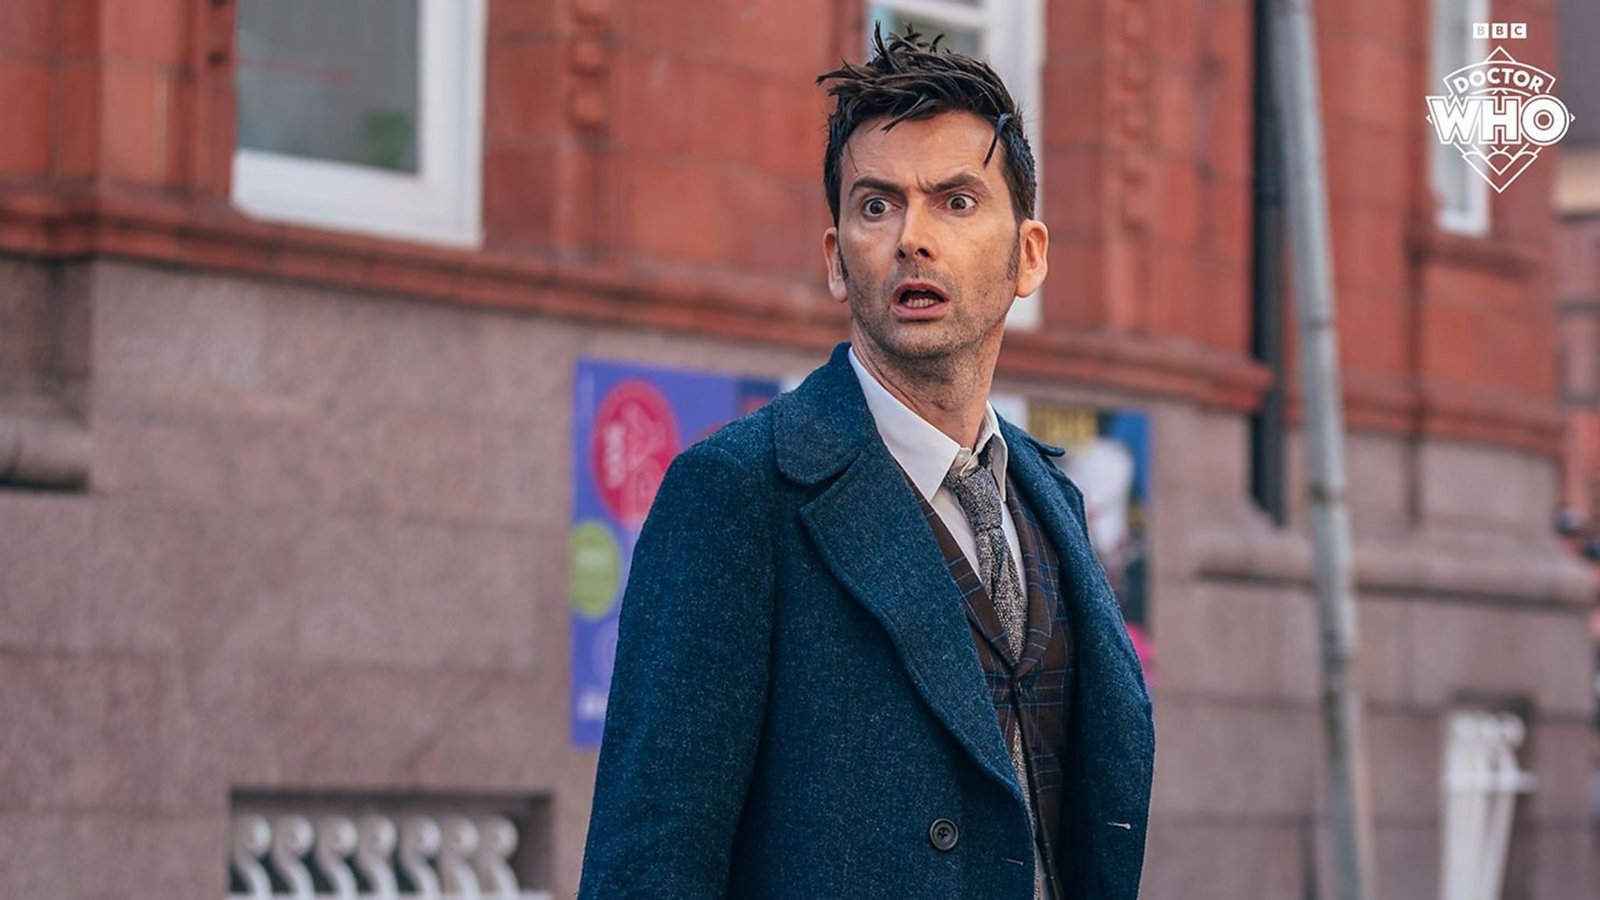 Doctor Who’s 60th Anniversary Trailer Originally Showed Russell T Davies’ “Bigger Plans”